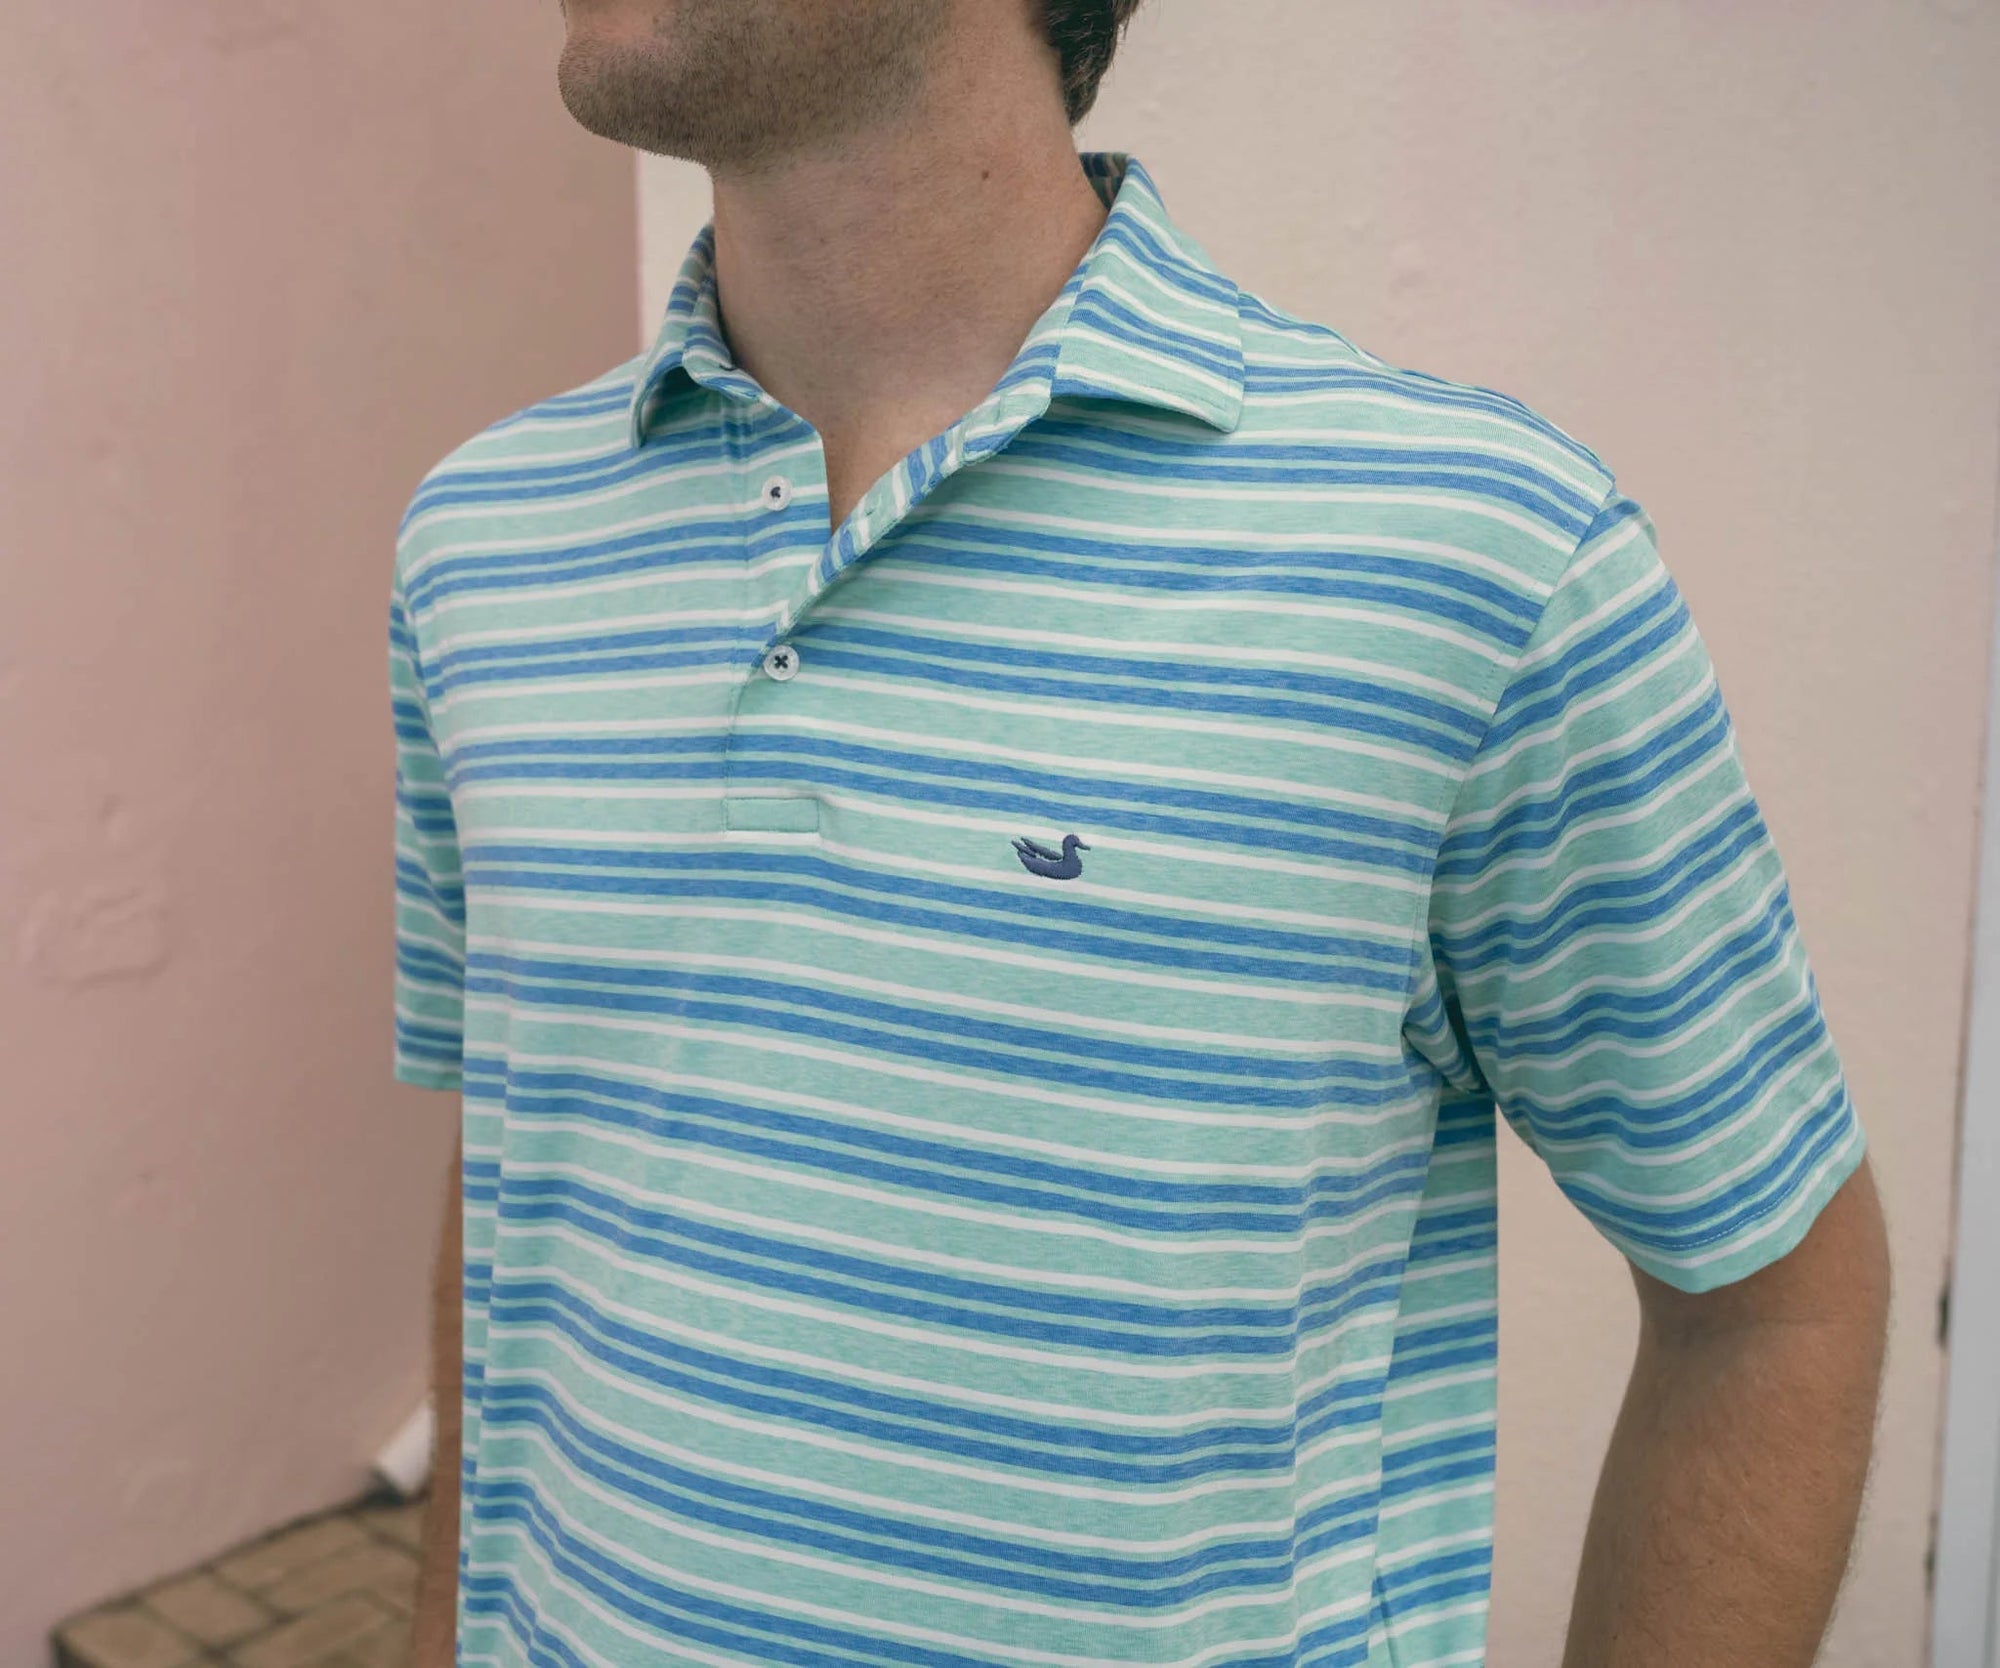 SOUTHERN MARSH COLLECTION Men's Polo MINT/LILAC / S PHVZMTLL